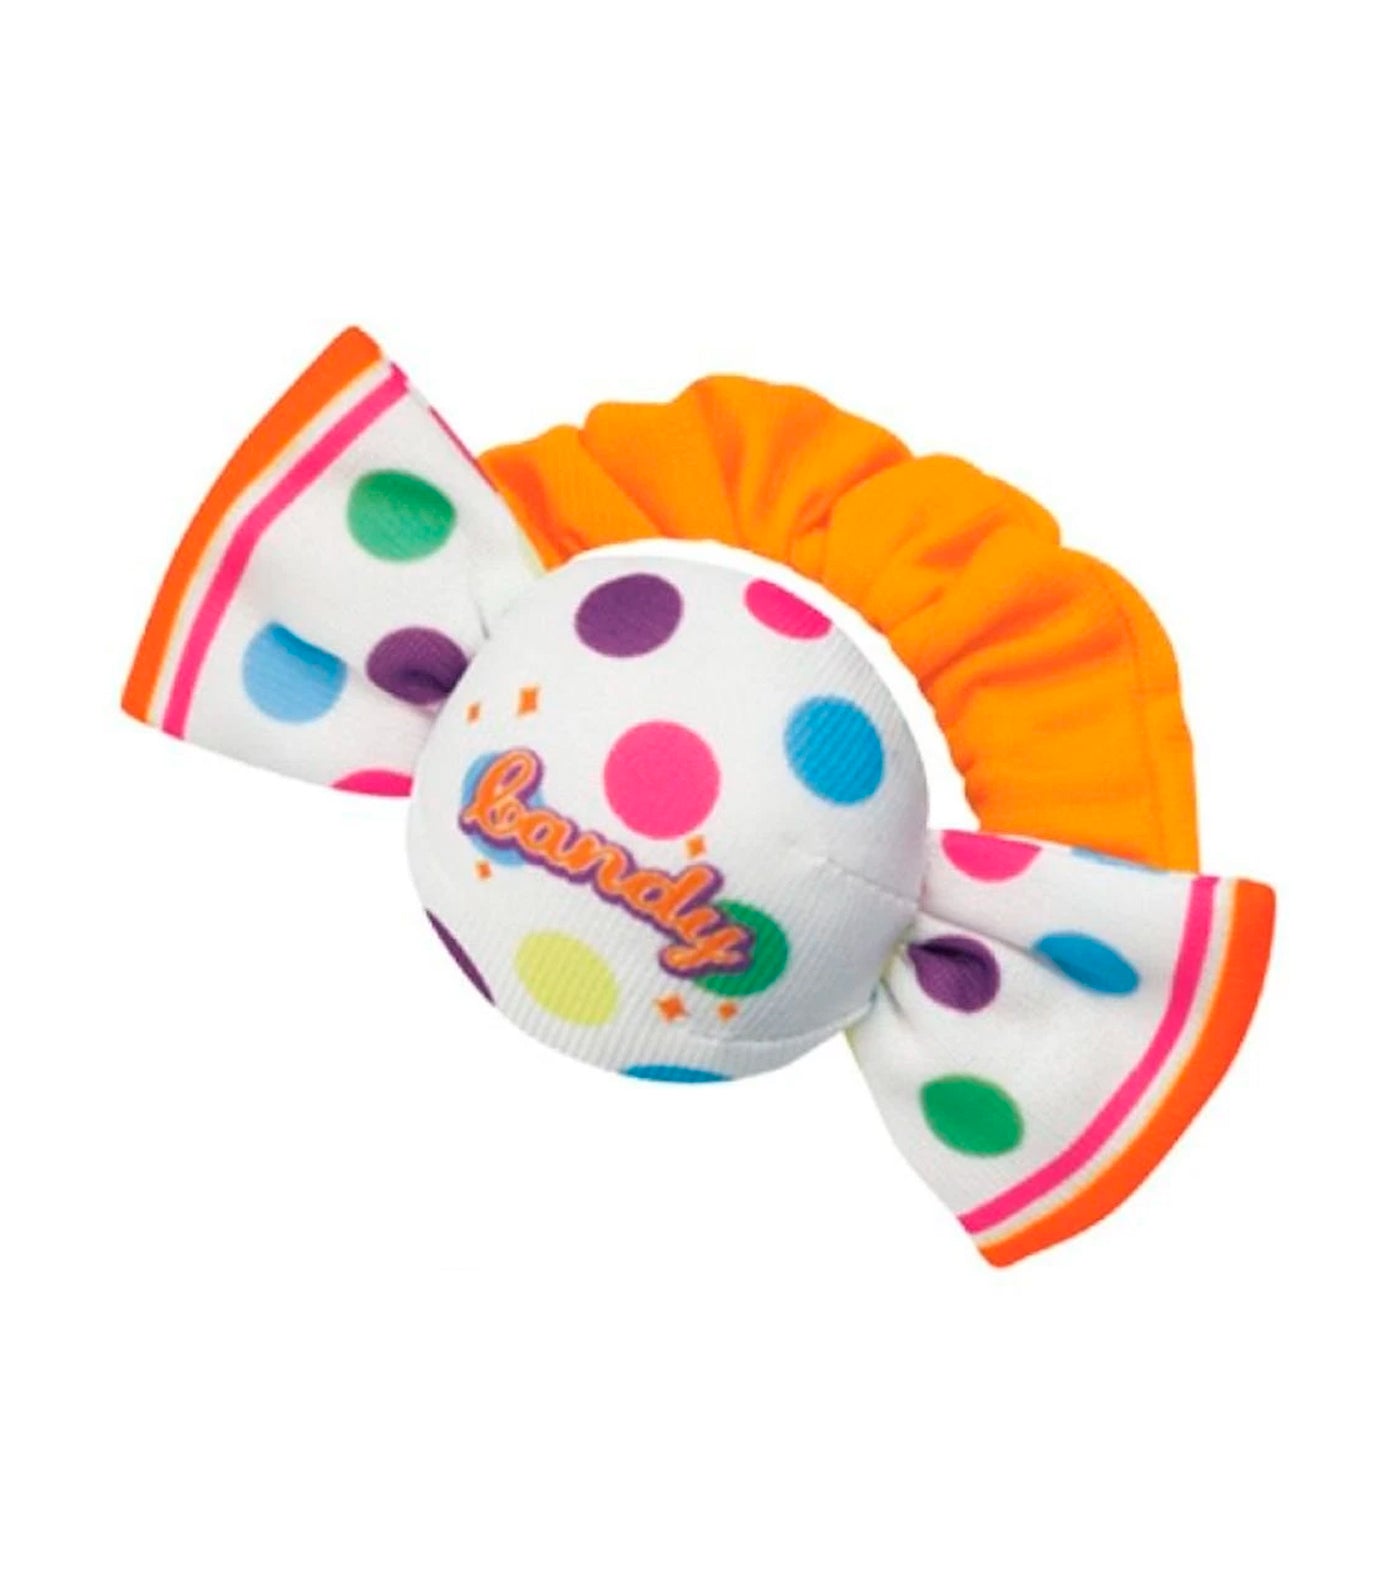 combi candy rattle